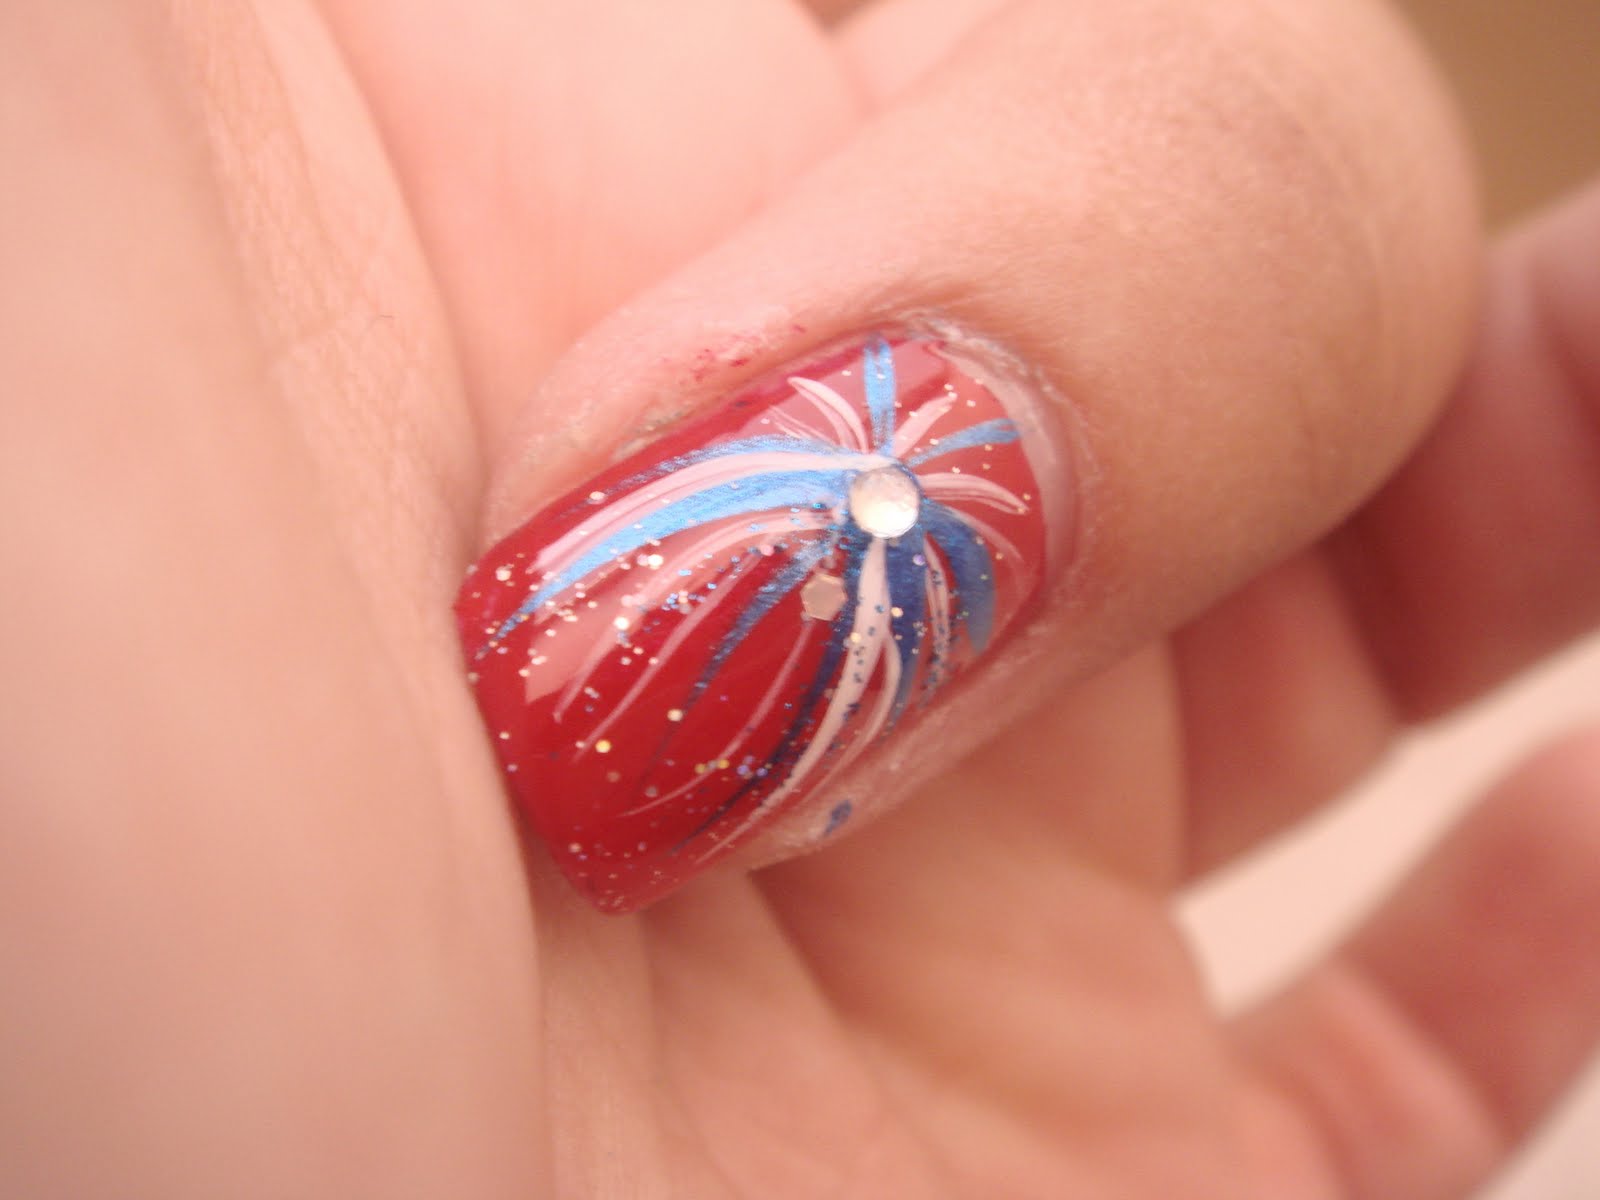 Easy DIY July 4th Nail Designs Using Red, White, and Blue Polish - wide 4